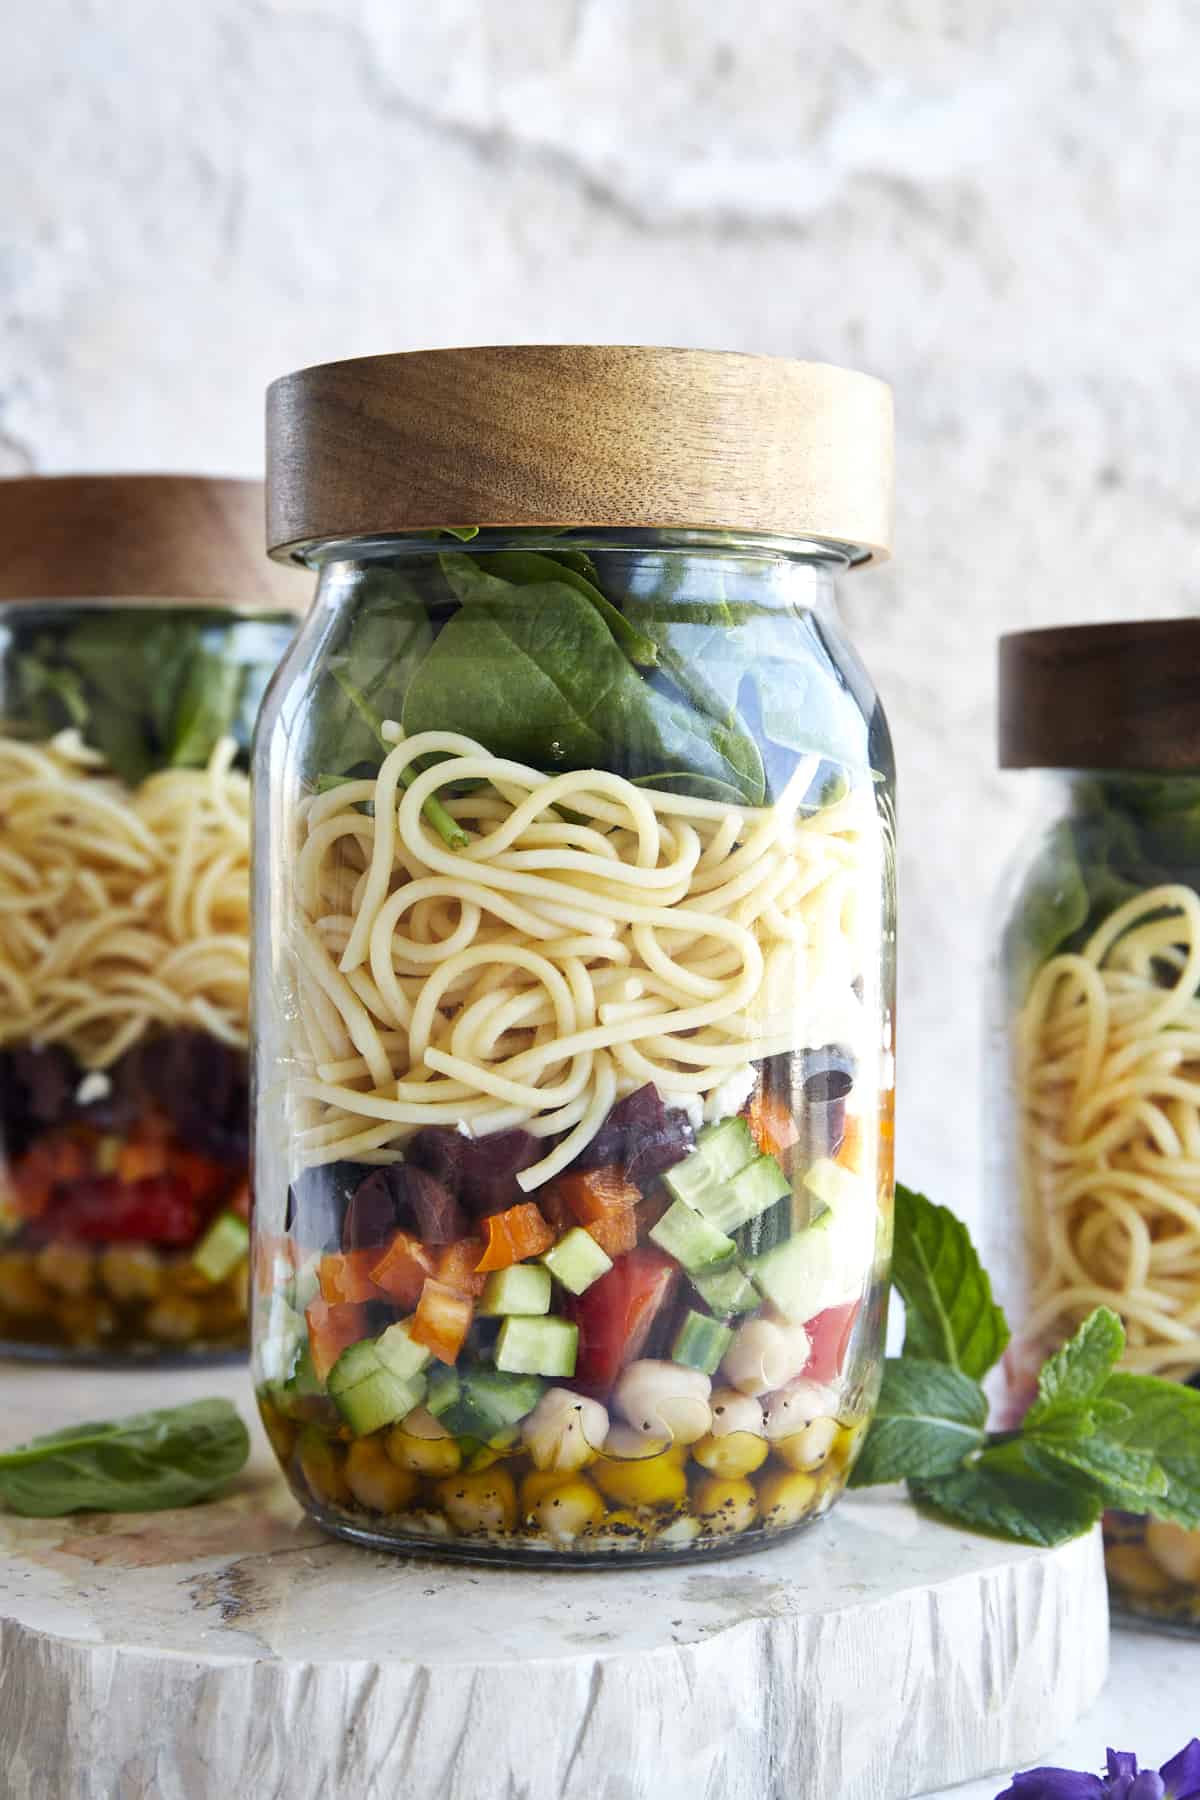 Salad in a Jar Recipes - Simple, Easy To Prepare, and Delicious